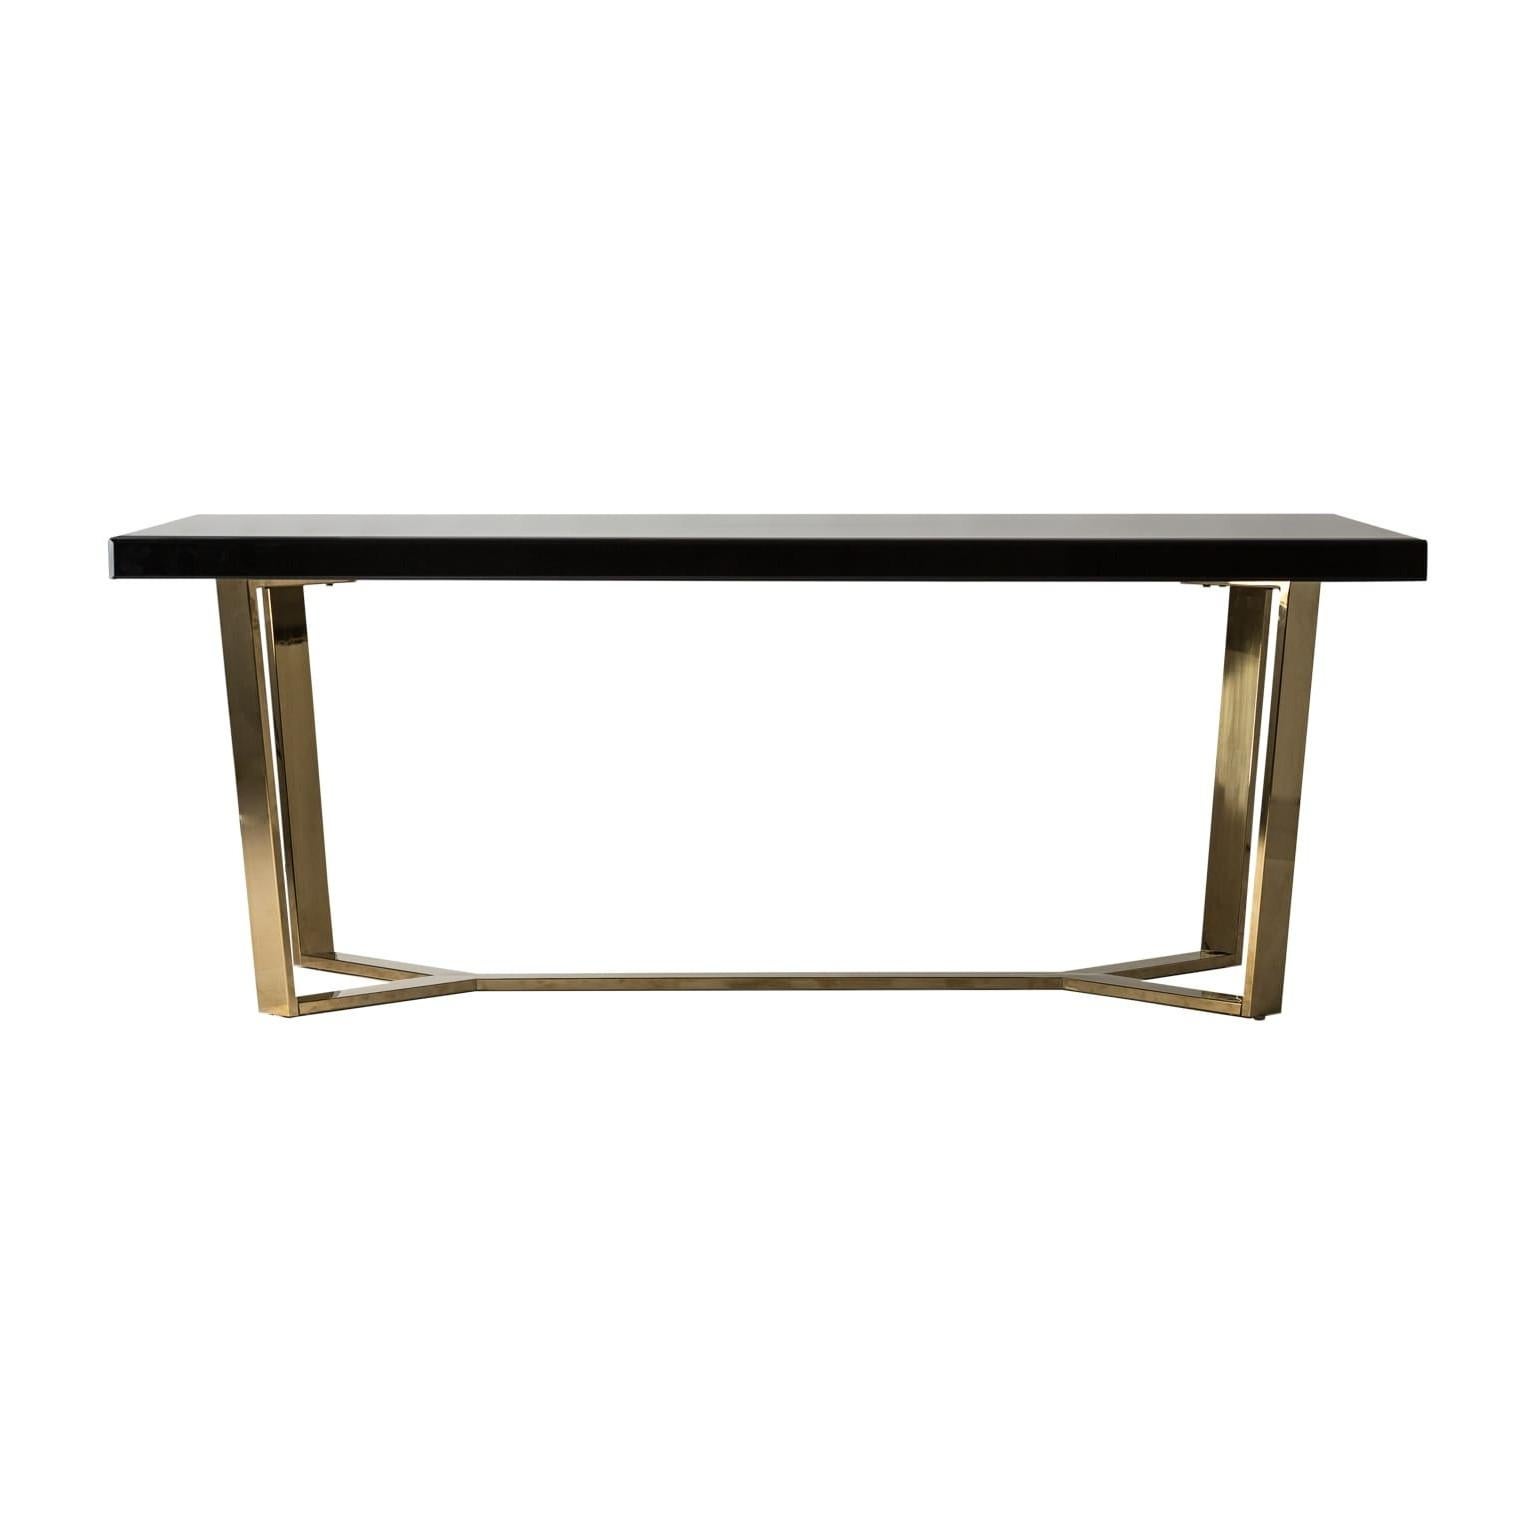 Modern Black Bevelled Glass Tray with Gilded Metal Base Rectangular Table